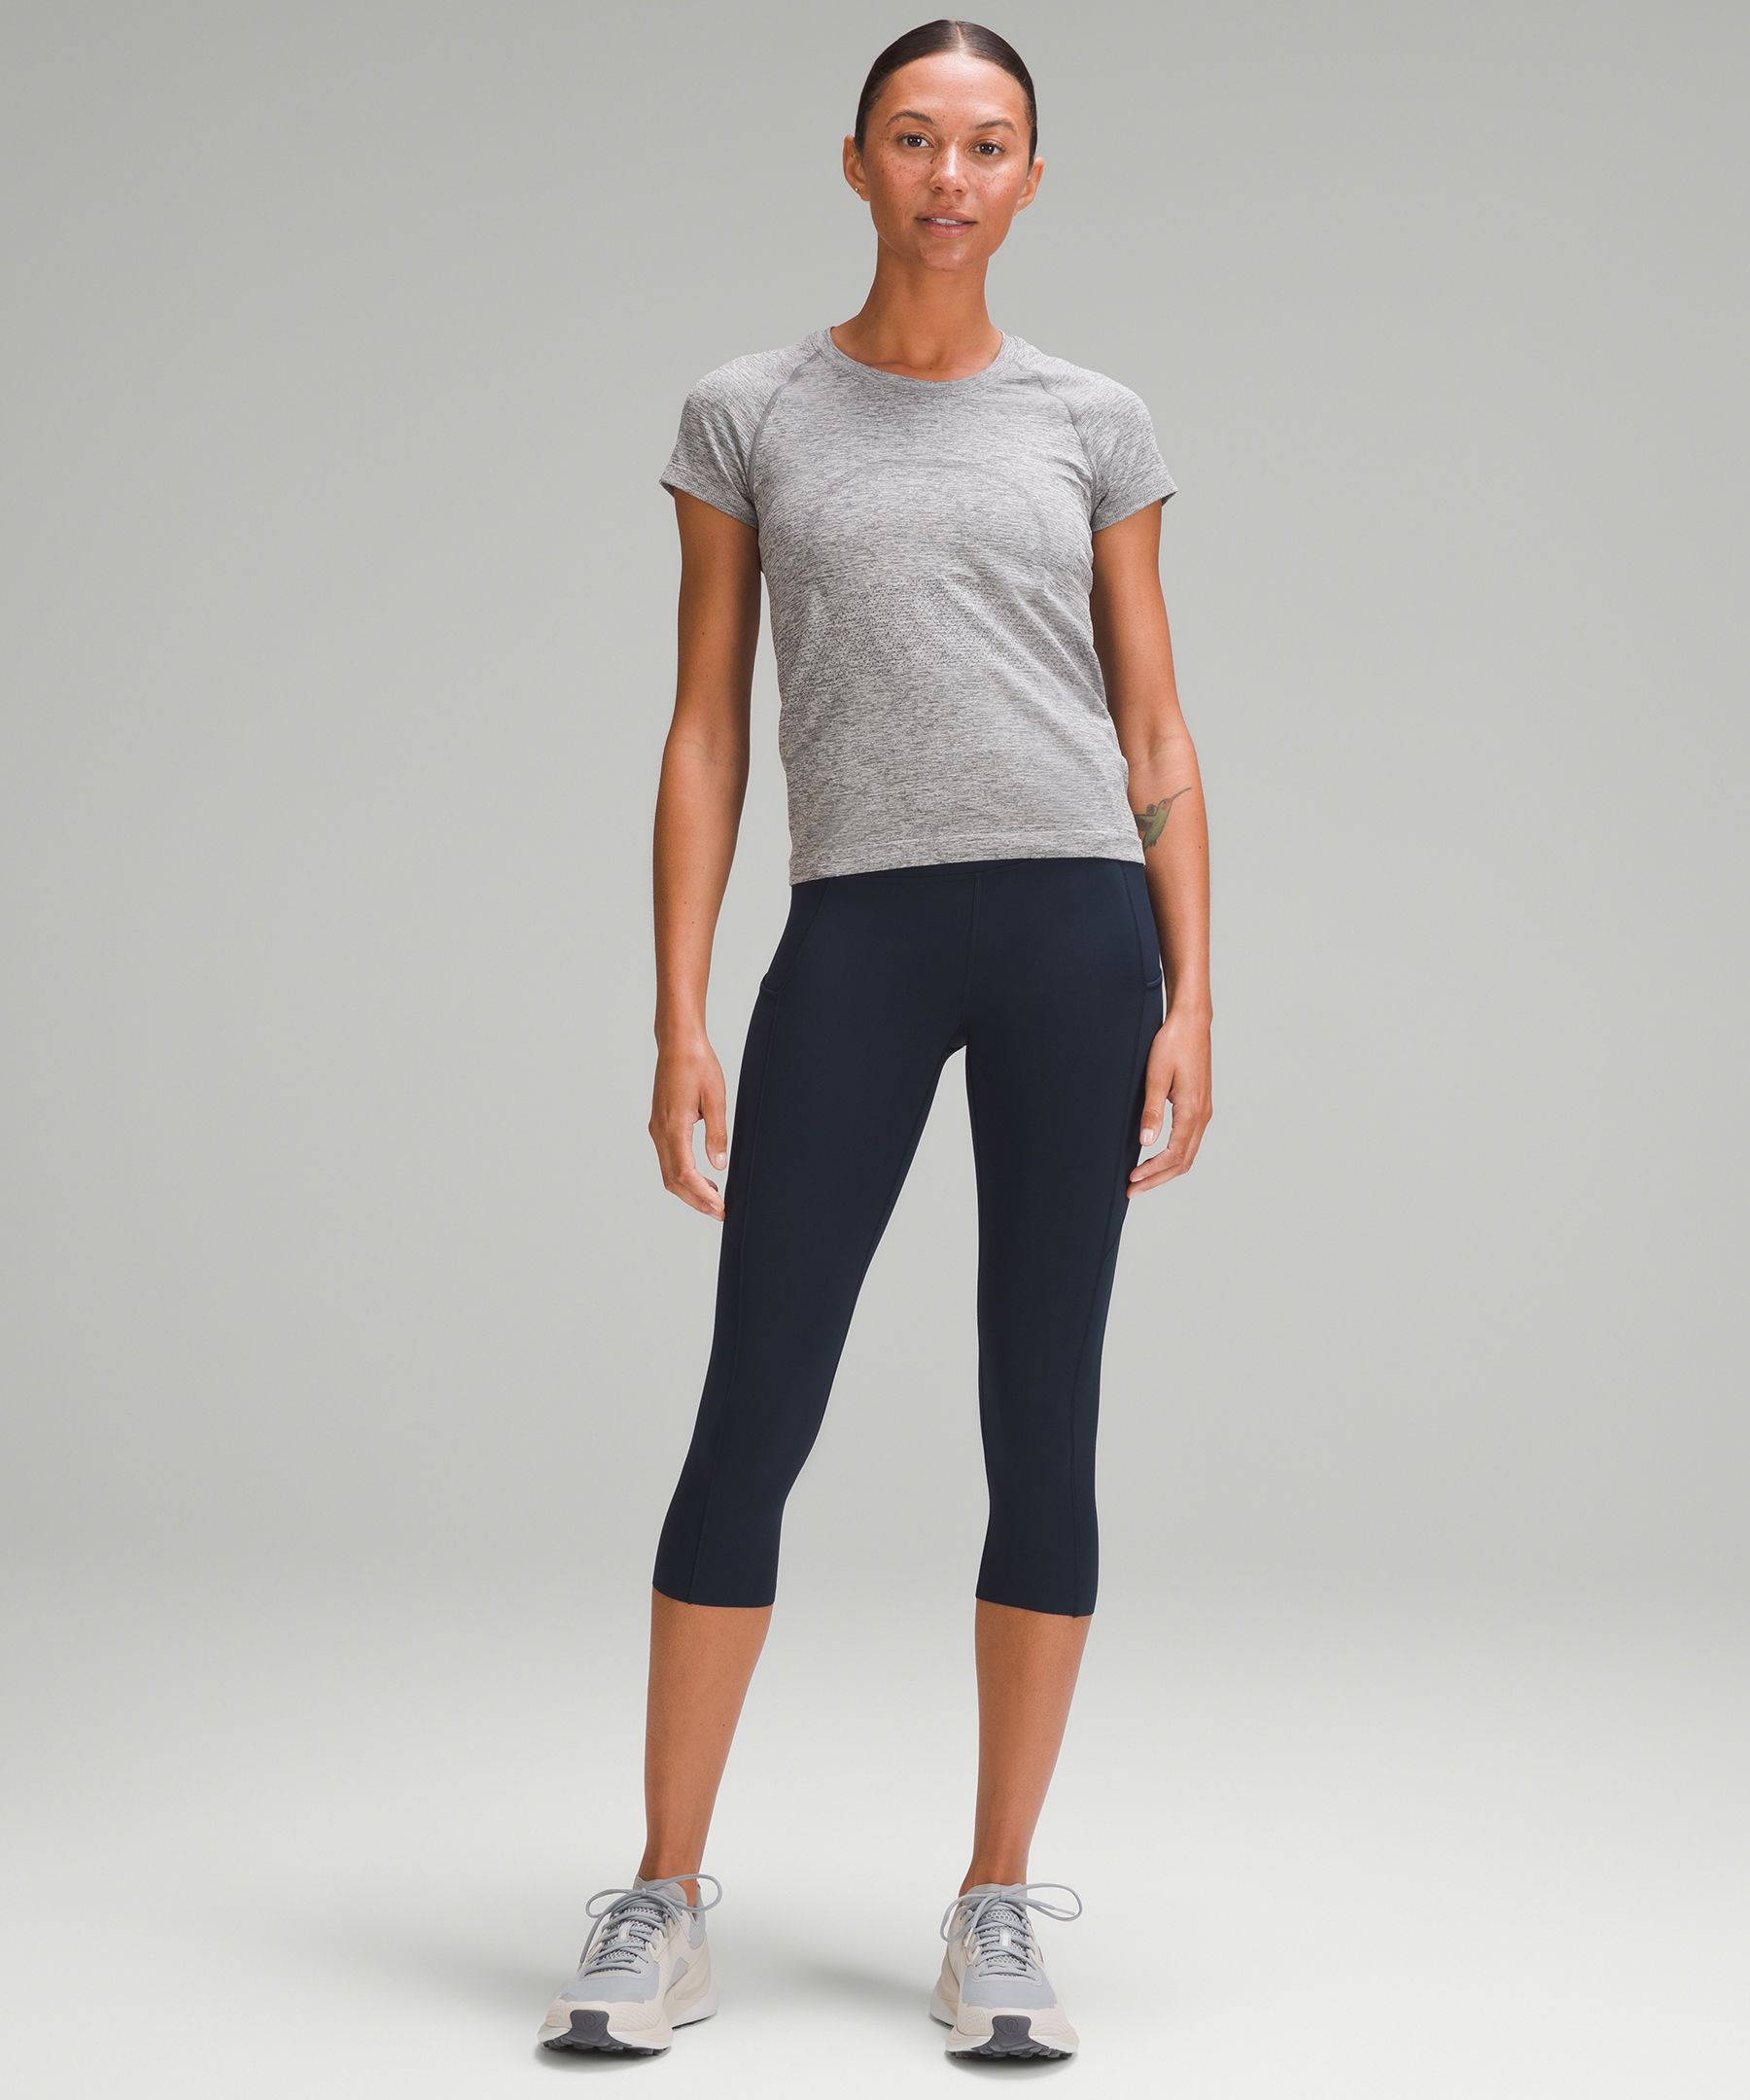 Fast and Free High-Rise Crop 19, Women's Capris